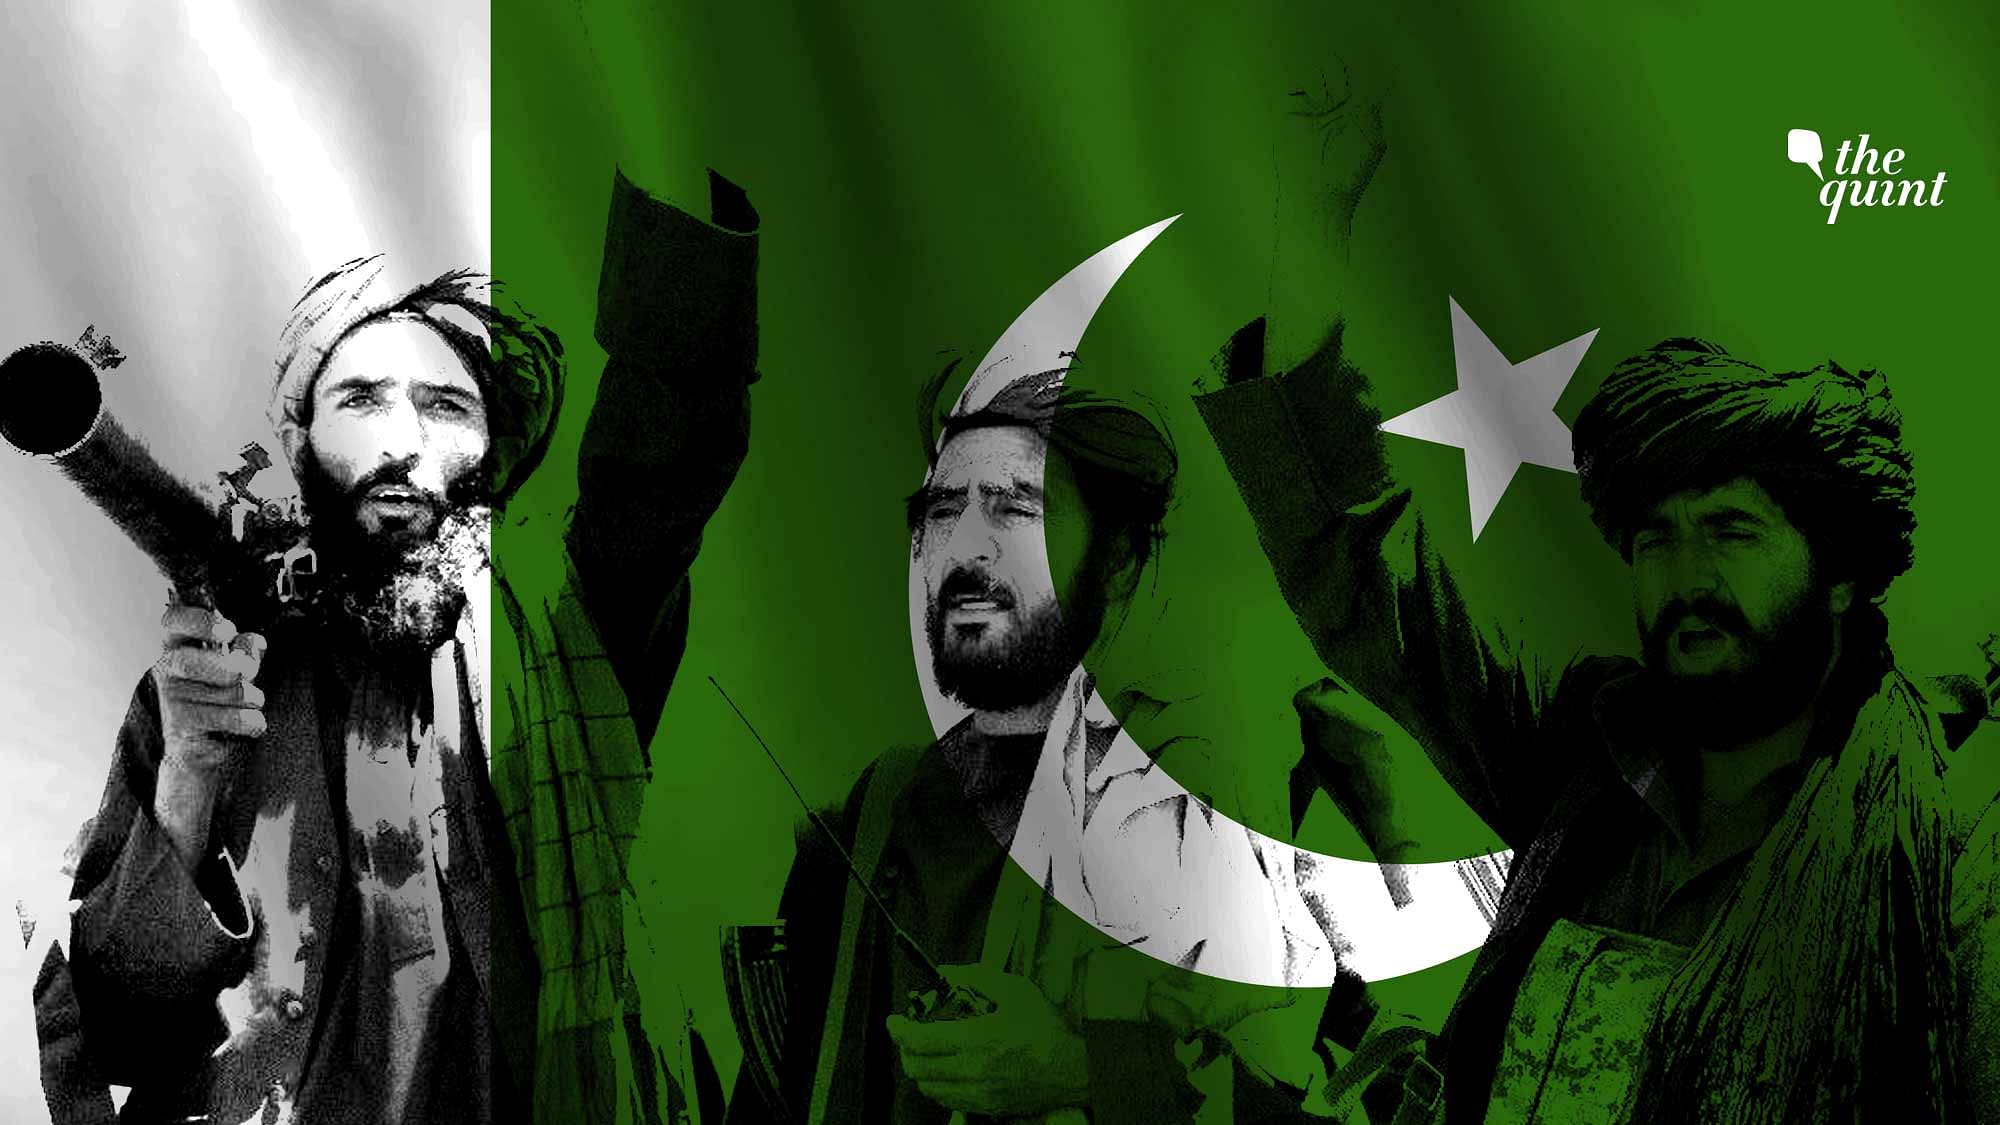 Image of Pakistan flag and an AP image of the Taliban used for representational purposes.